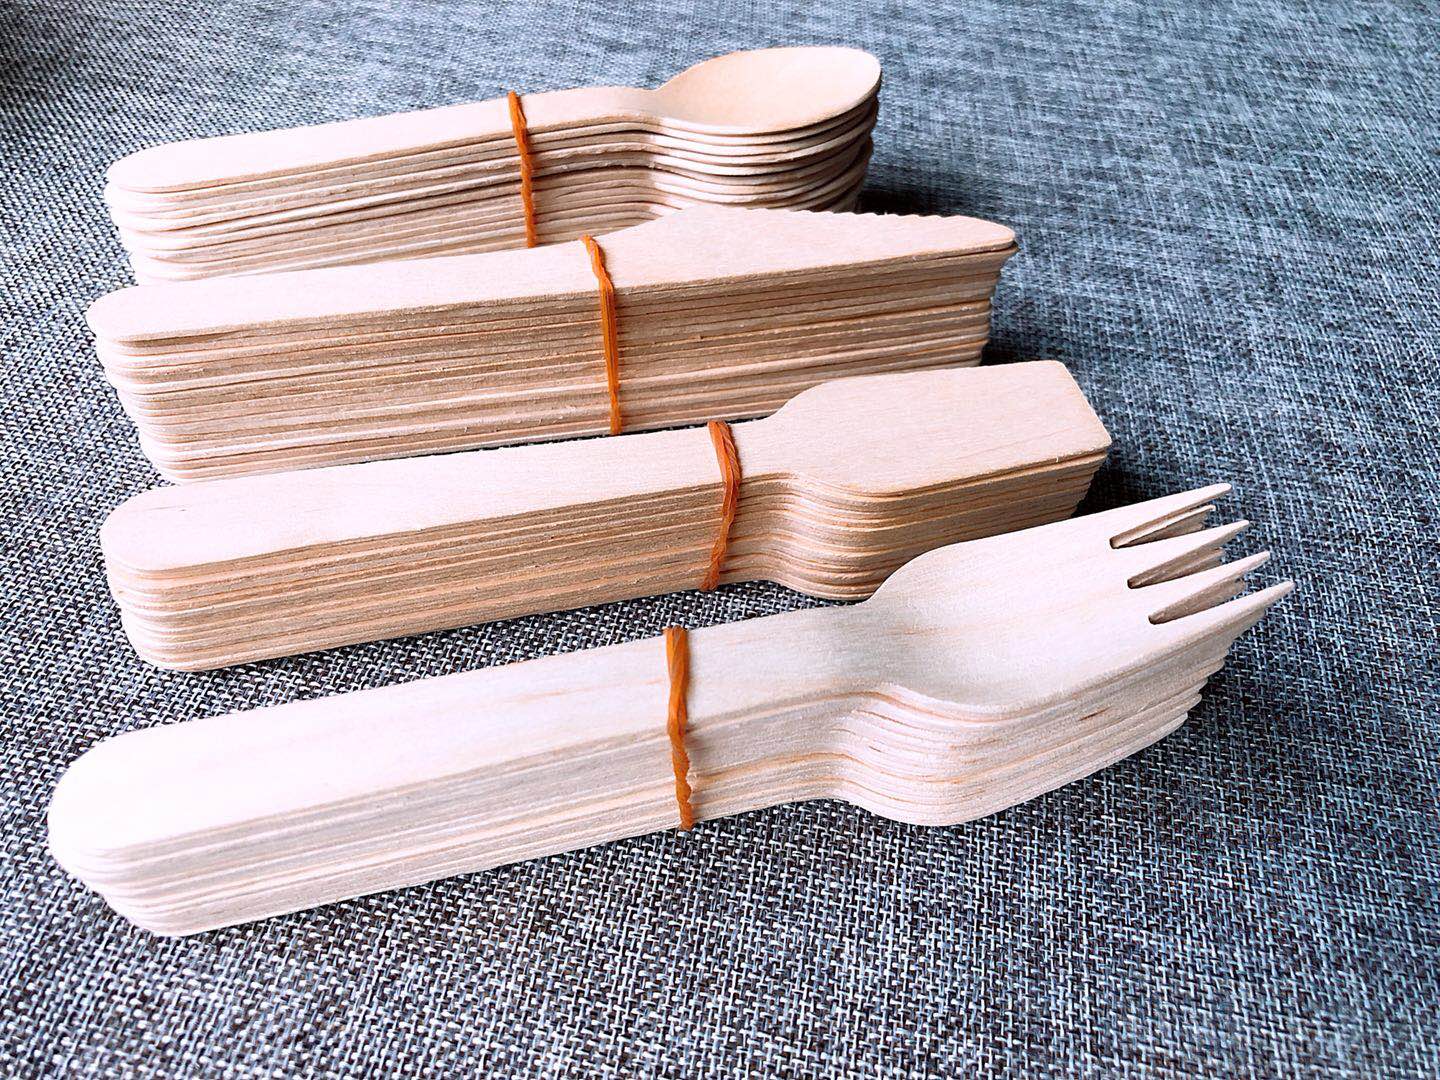 Is wooden cutlery safe